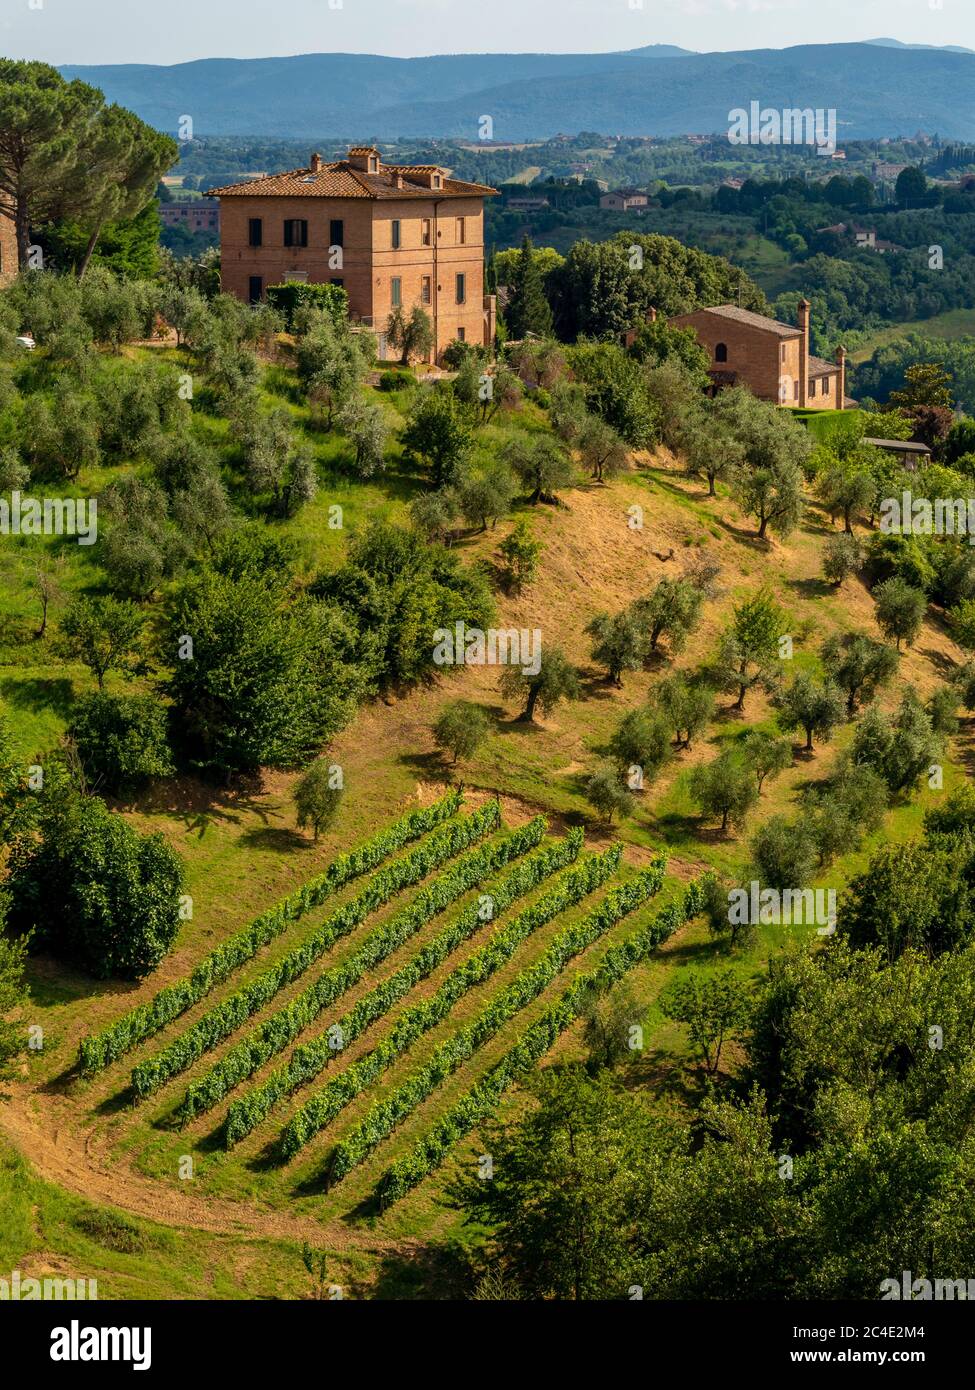 Grapevines and olive trees growing on a steep hillside in Siena. Italy Stock Photo